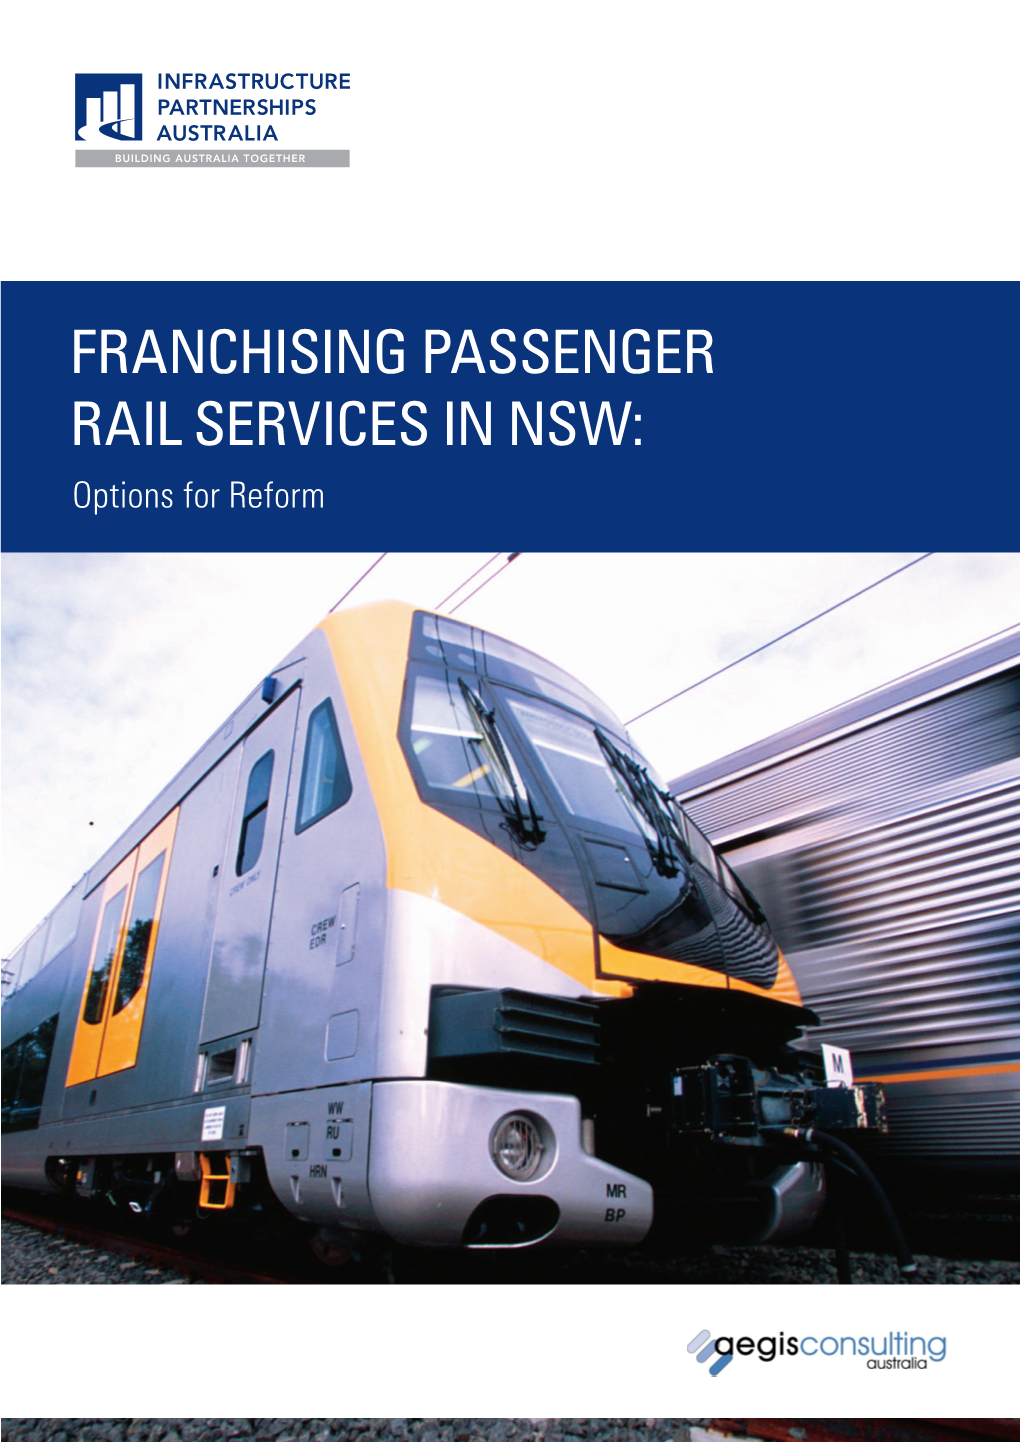 FRANCHISING PASSENGER RAIL SERVICES in NSW: Options for Reform